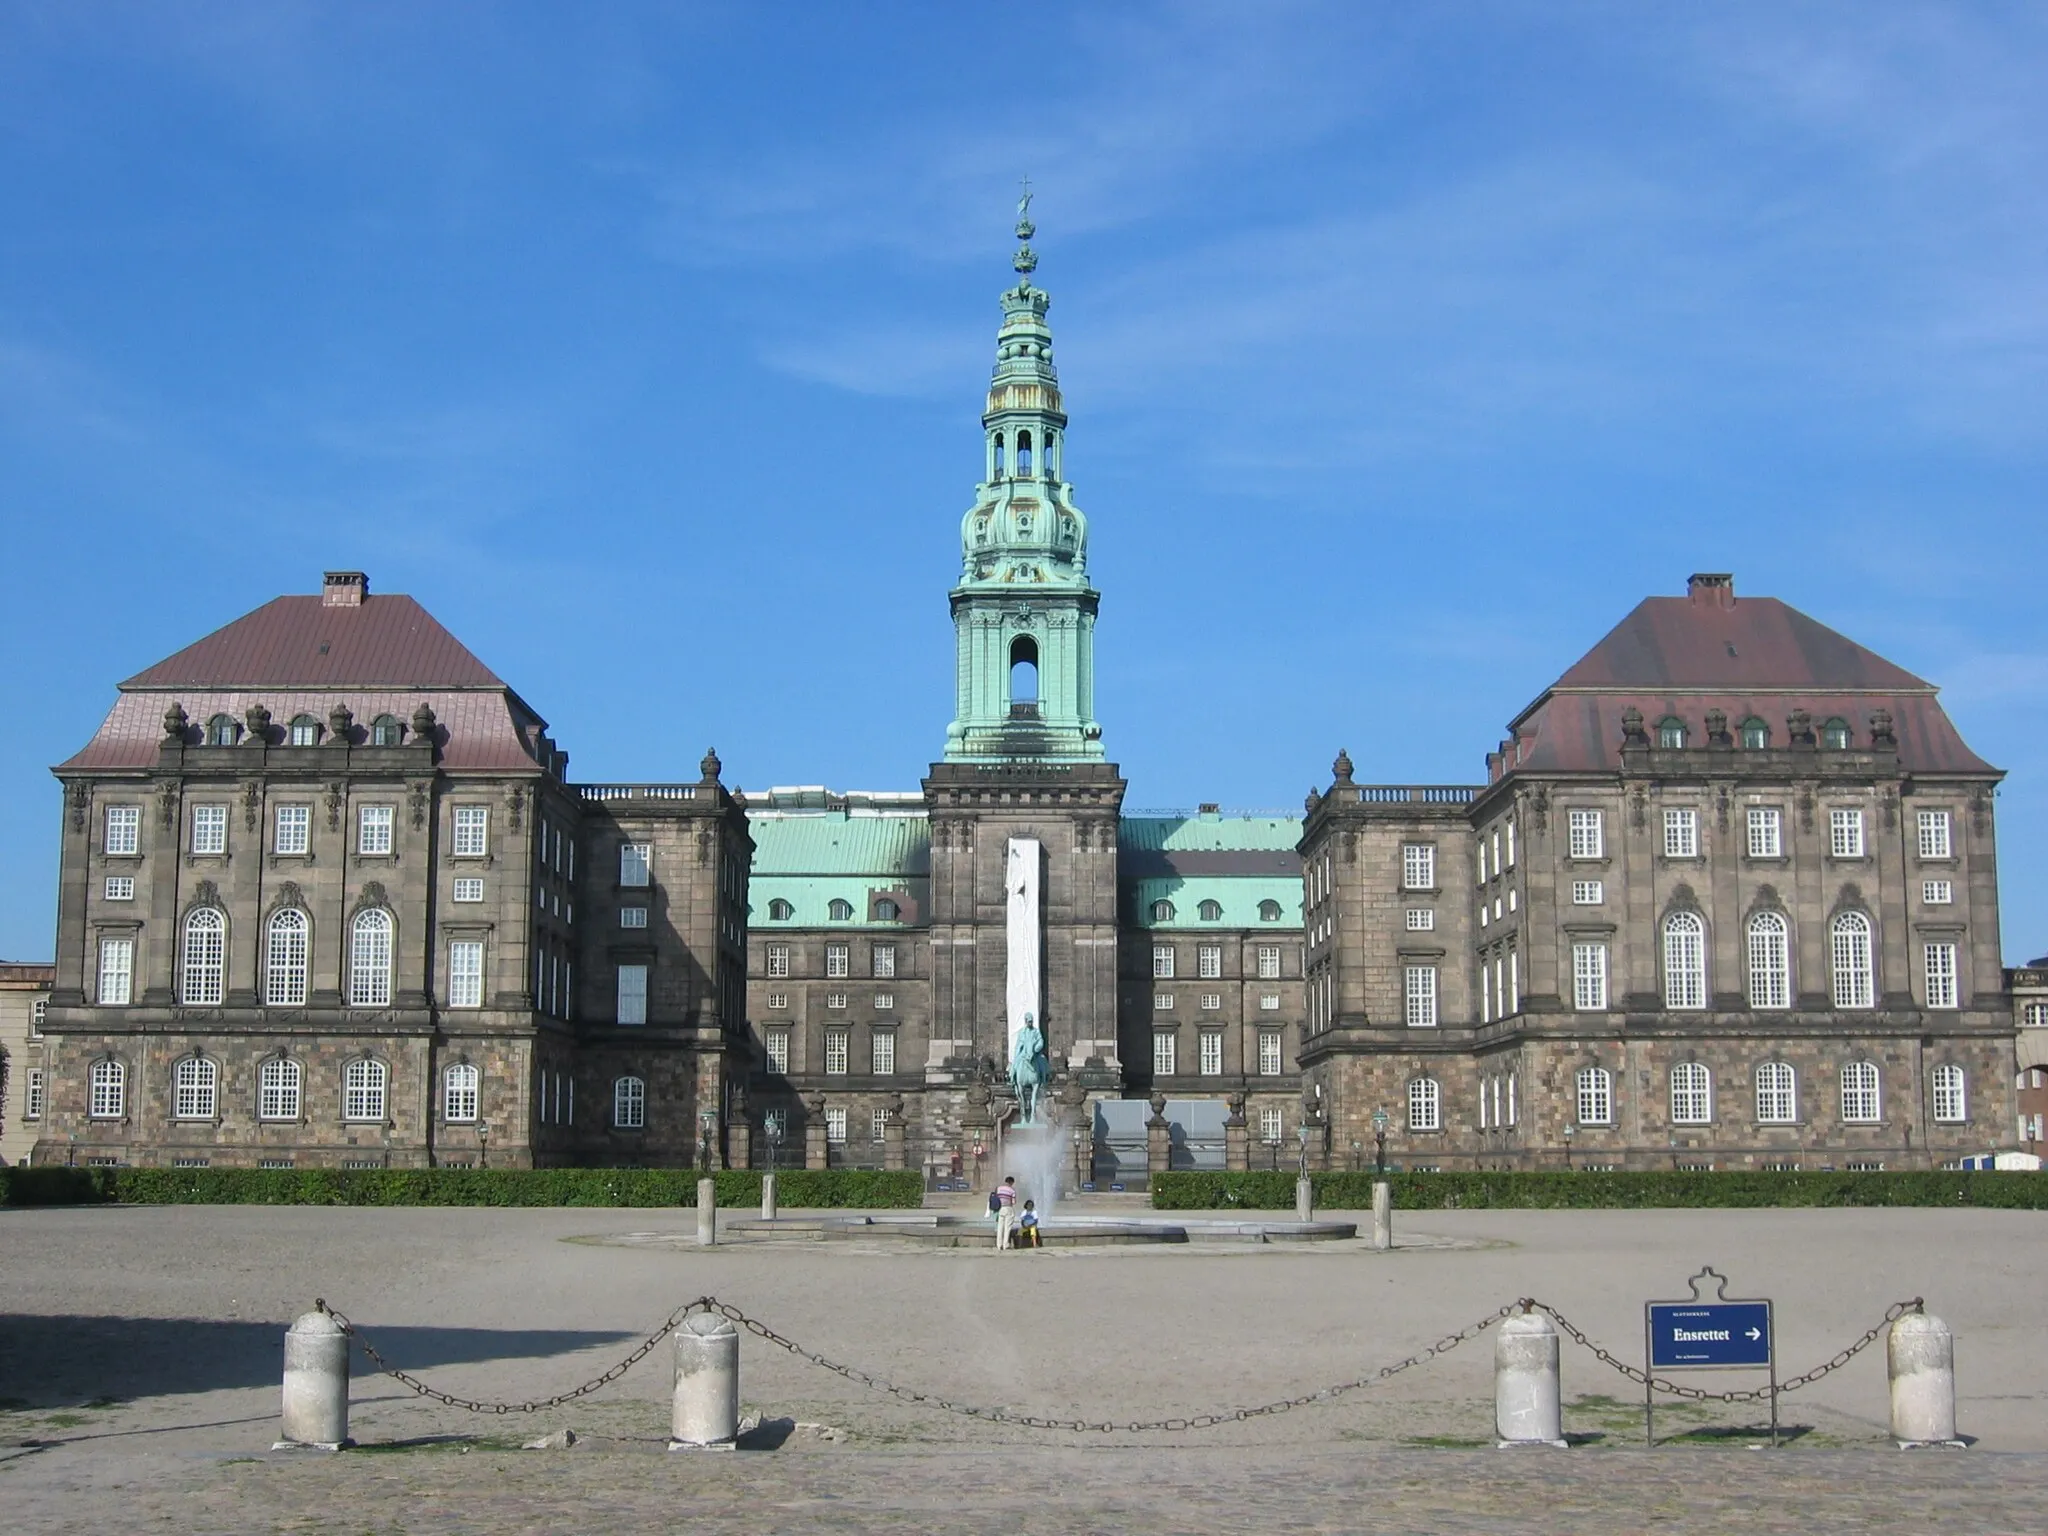 Photo showing: Christiansborg Palace - Home of the Danish Parliament, Supreme Court, and Prime Minister